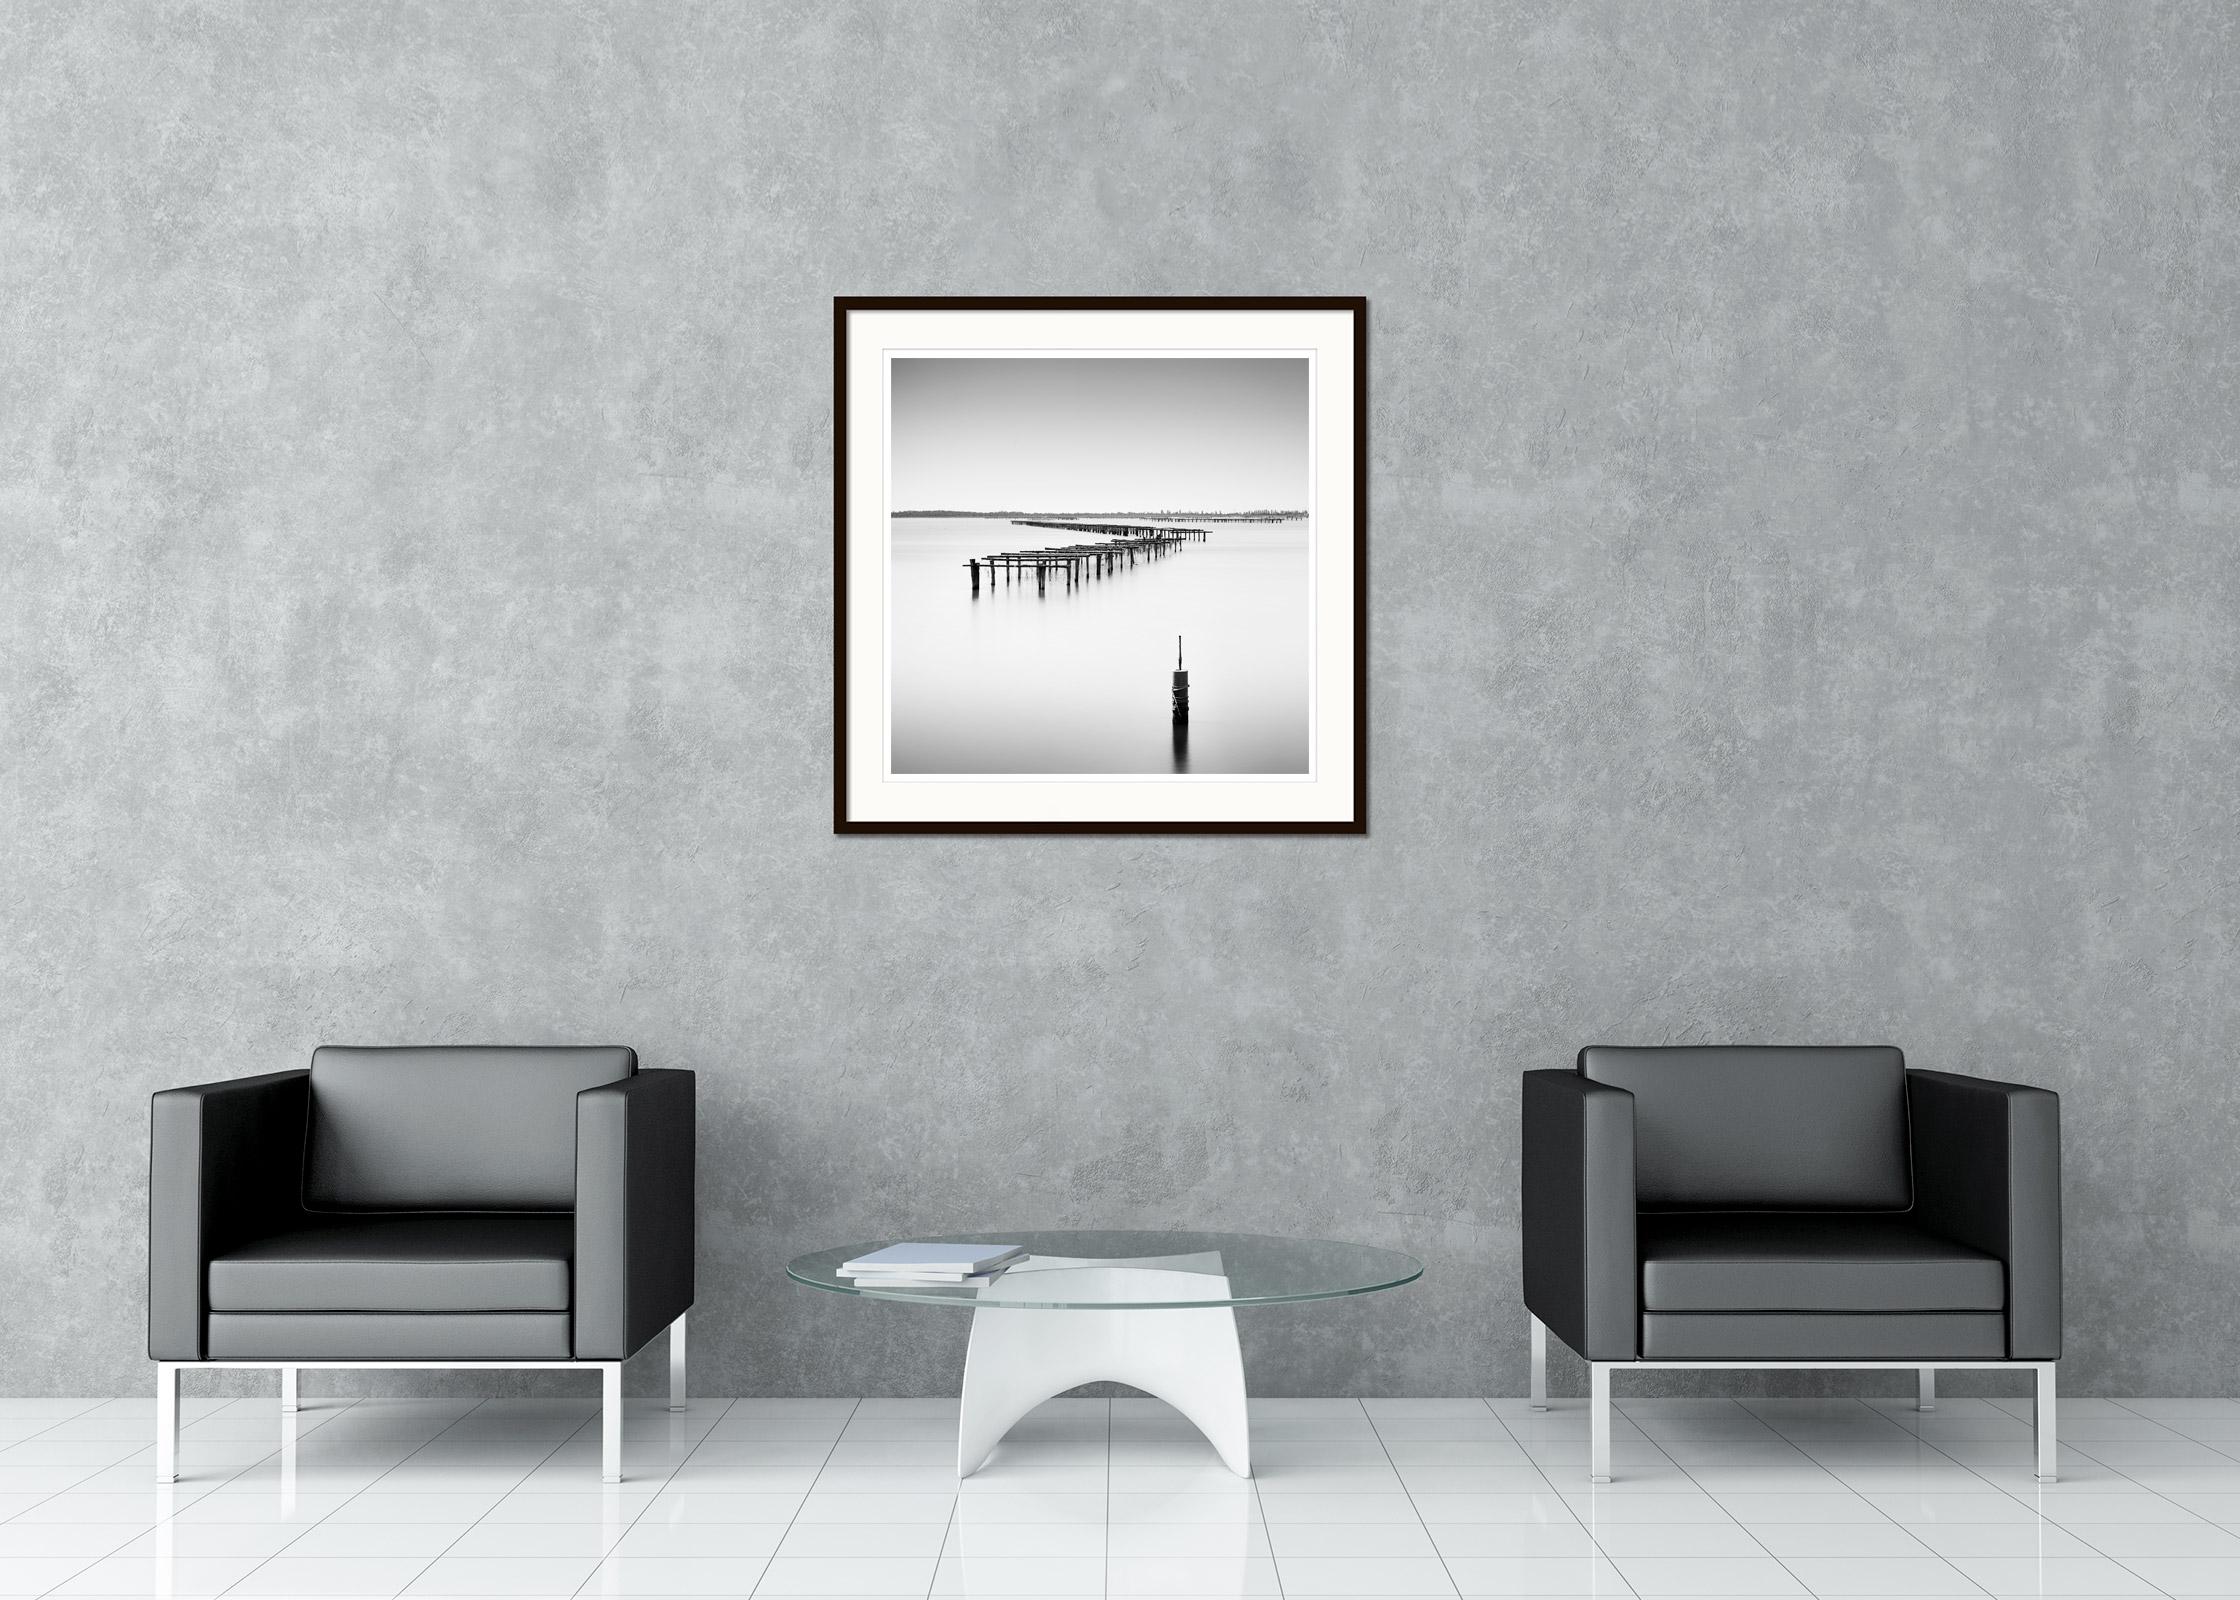 Black and white fine art long exposure waterscape - landscape photography print. Archival pigment ink print, edition of 7. Signed, titled, dated and numbered by artist. Certificate of authenticity included. Printed with 4cm white